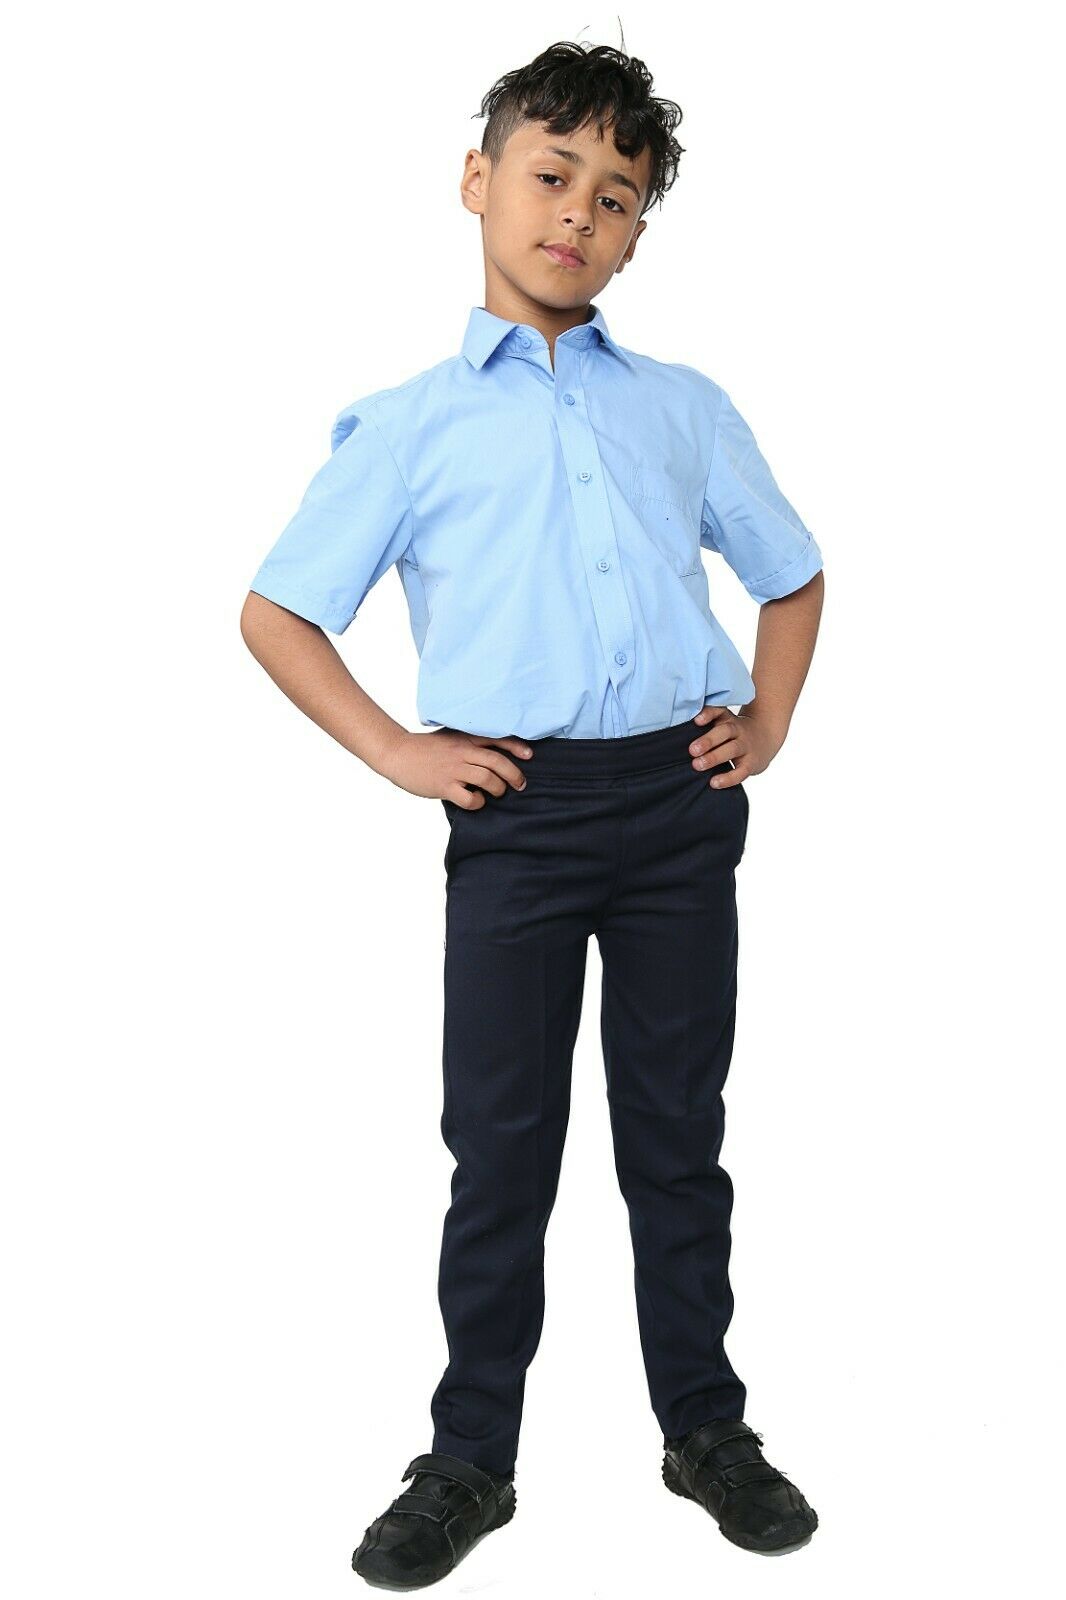 Copy of Age 2-10 Boys Pull Up Elasticated Back School Trousers Easy Wear -Navy